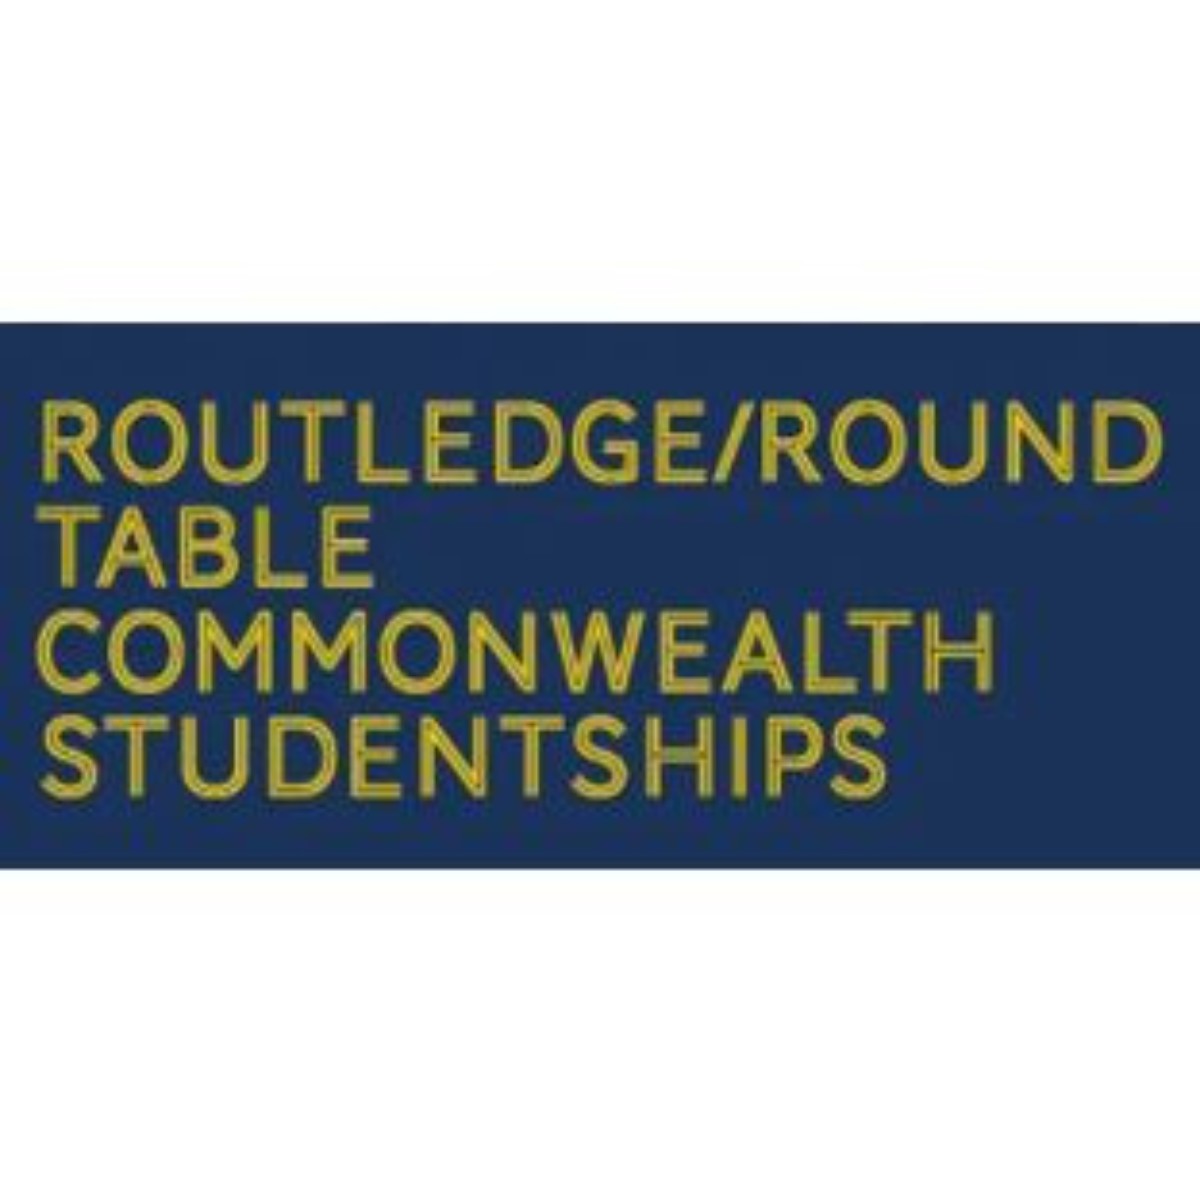 Routledge/Round Table Commonwealth 2023/24 PhD Studentships